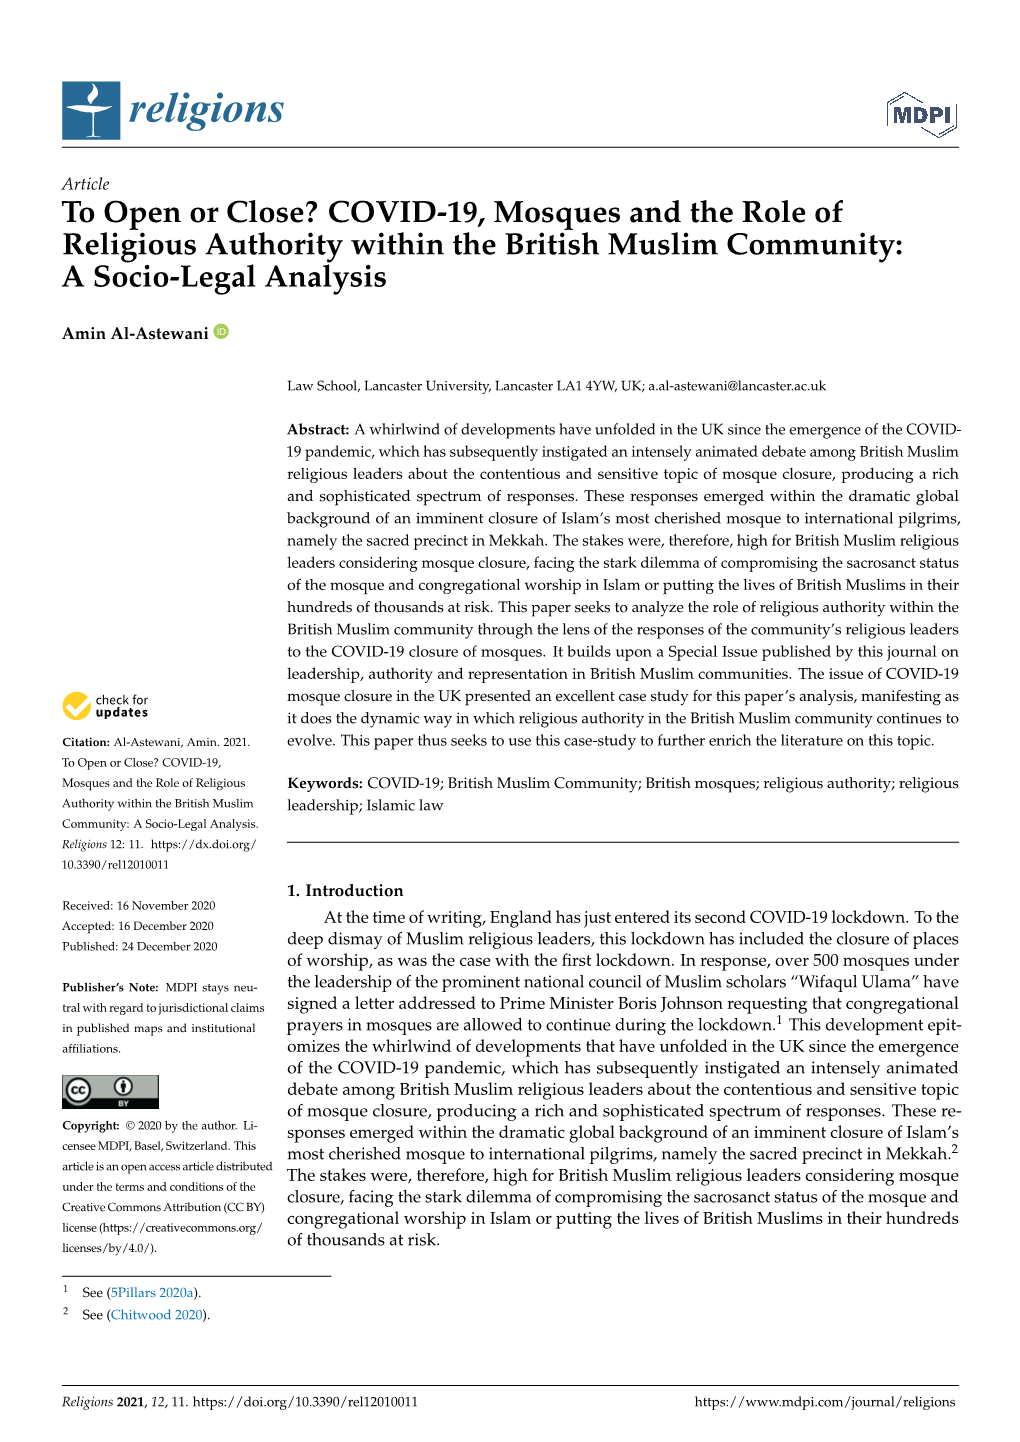 COVID-19, Mosques and the Role of Religious Authority Within the British Muslim Community: a Socio-Legal Analysis